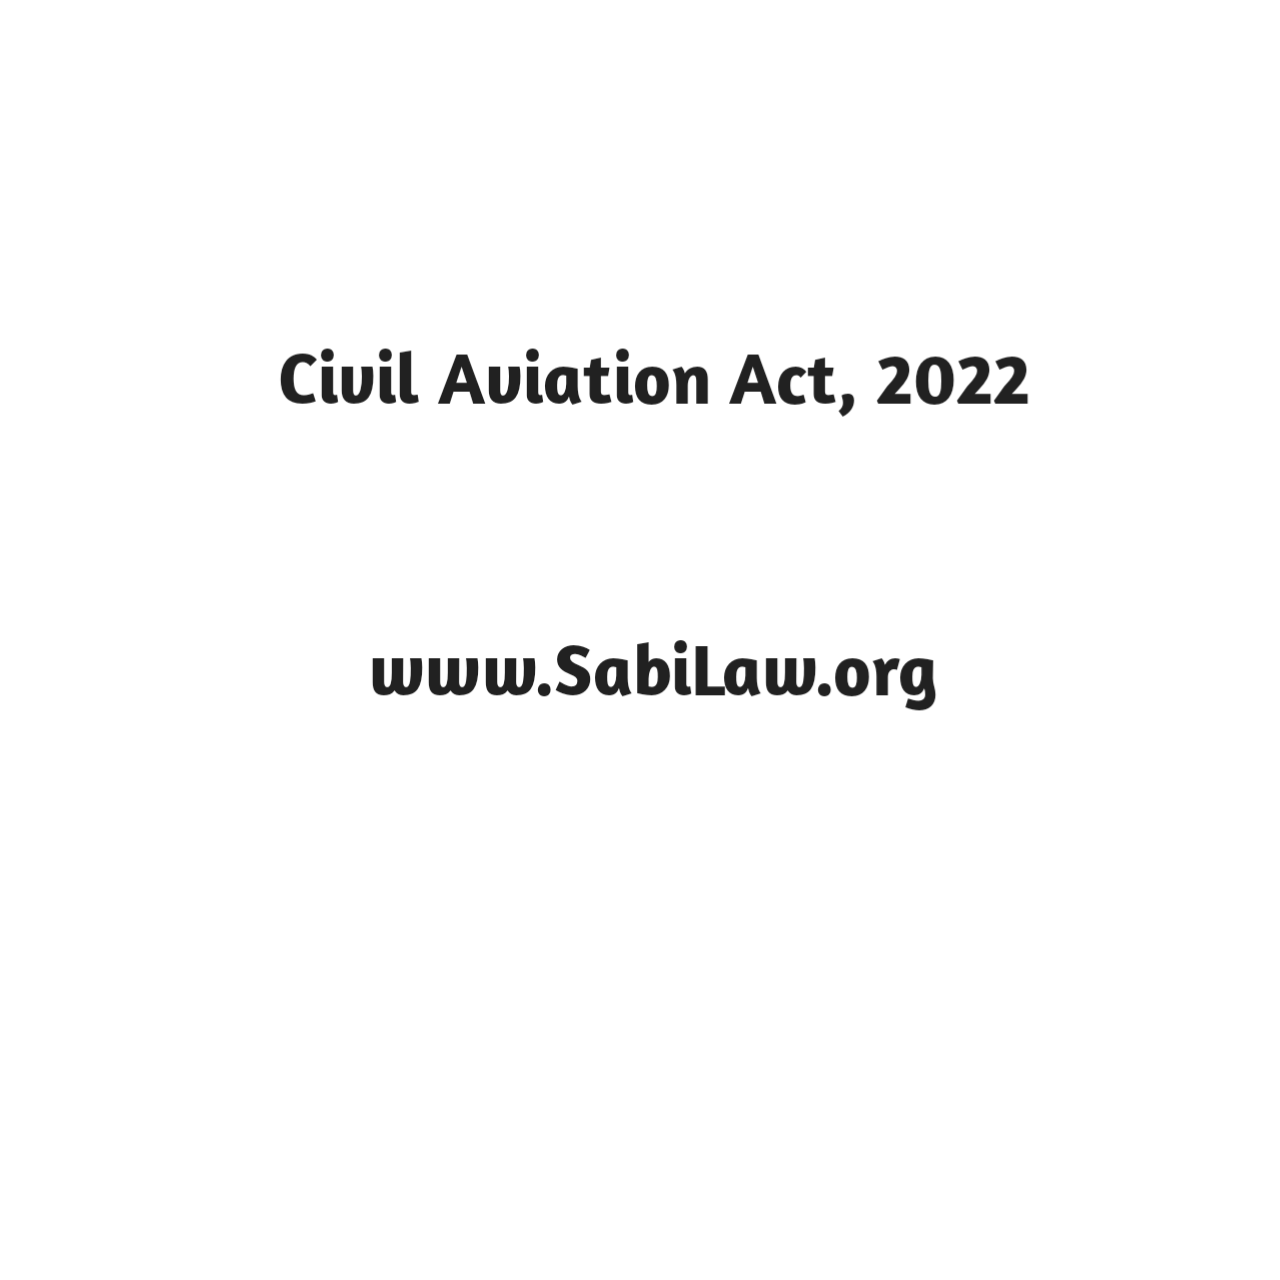 Click to download a copy of the Civil Aviation Act, 2022